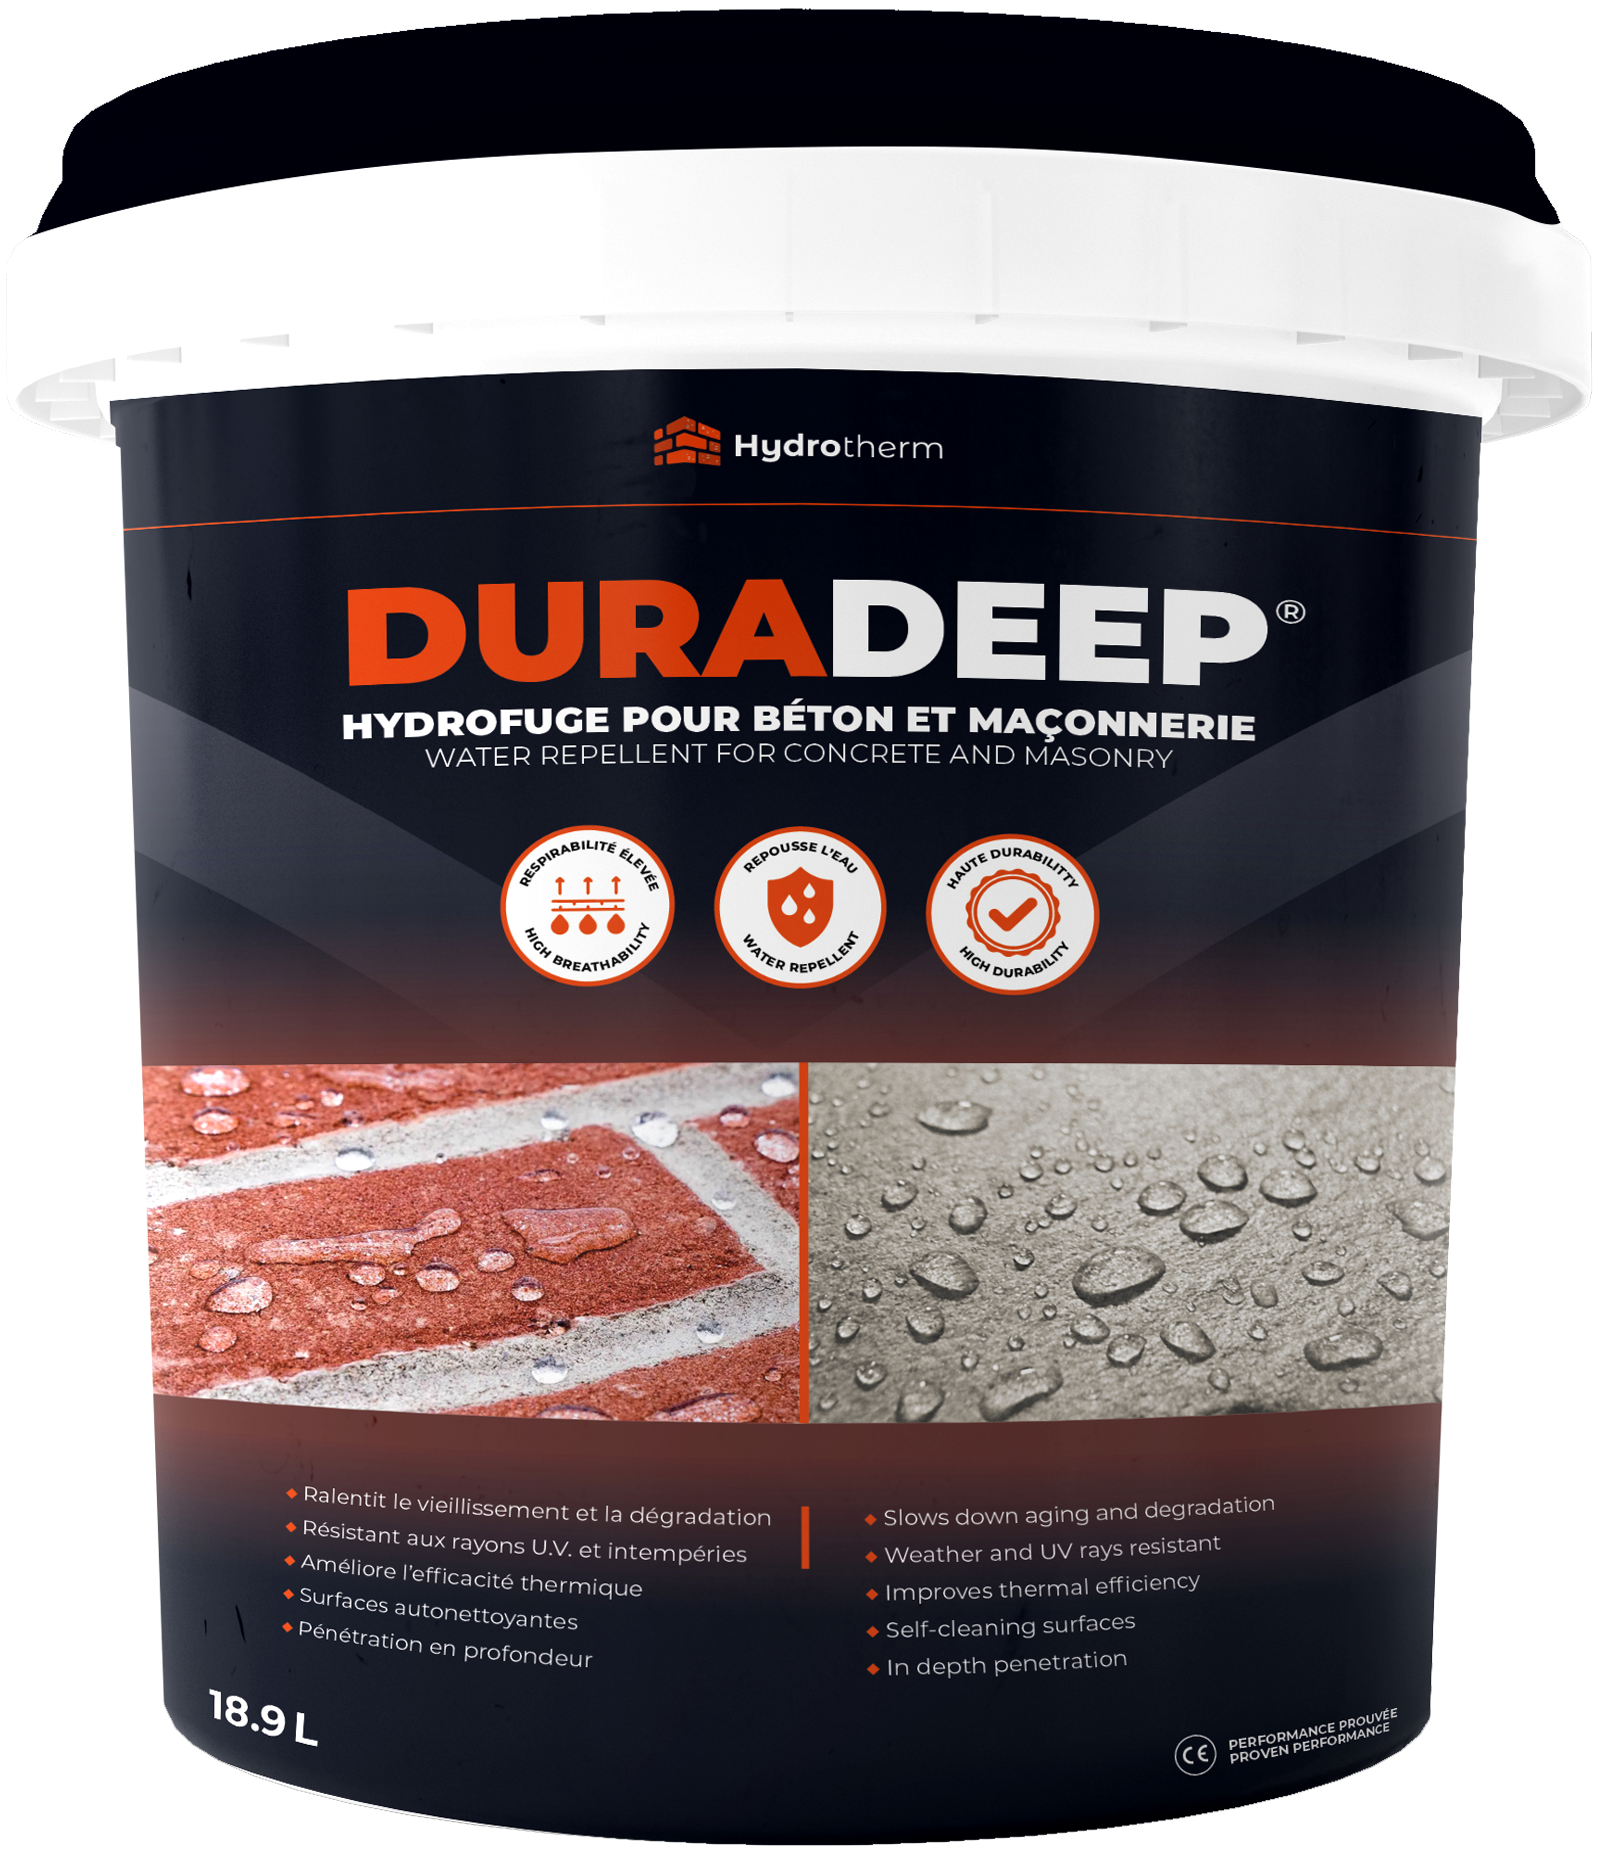 DURADEEP - Protects your concrete and masonry